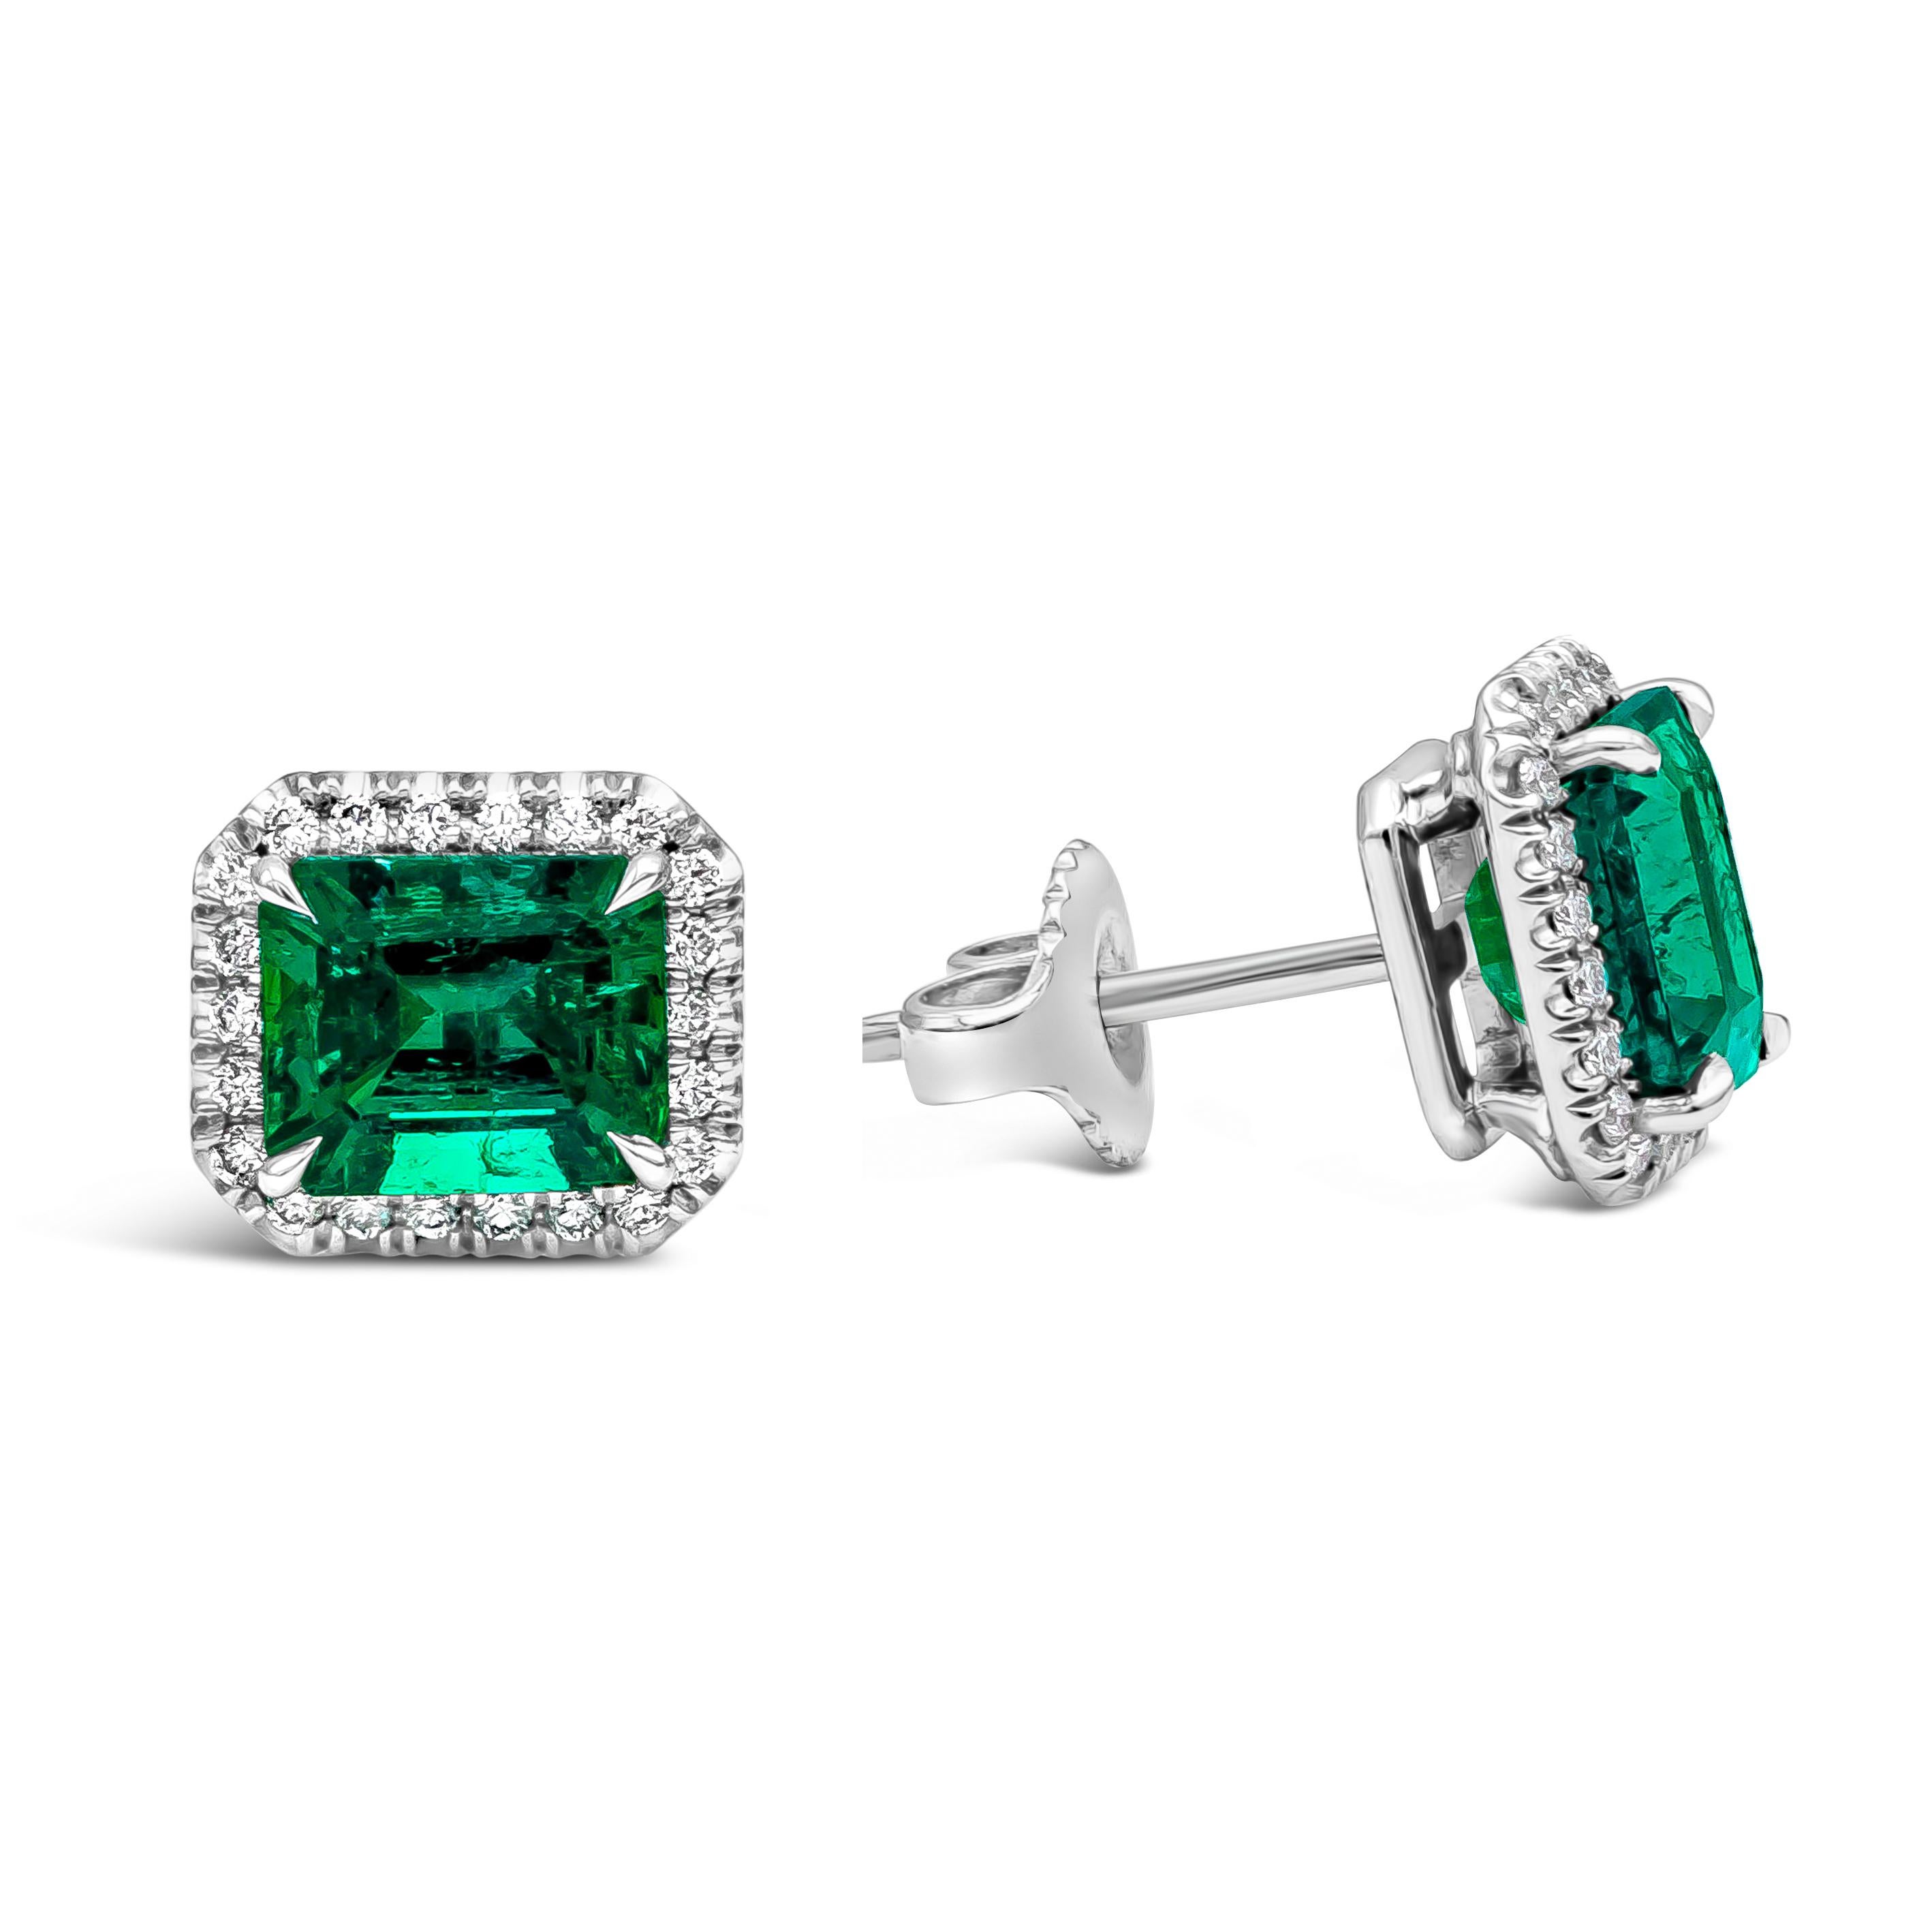 2.41 Carats Emerald Cut Colombian Muzo Emerald with Diamond Halo Stud Earrings In New Condition For Sale In New York, NY